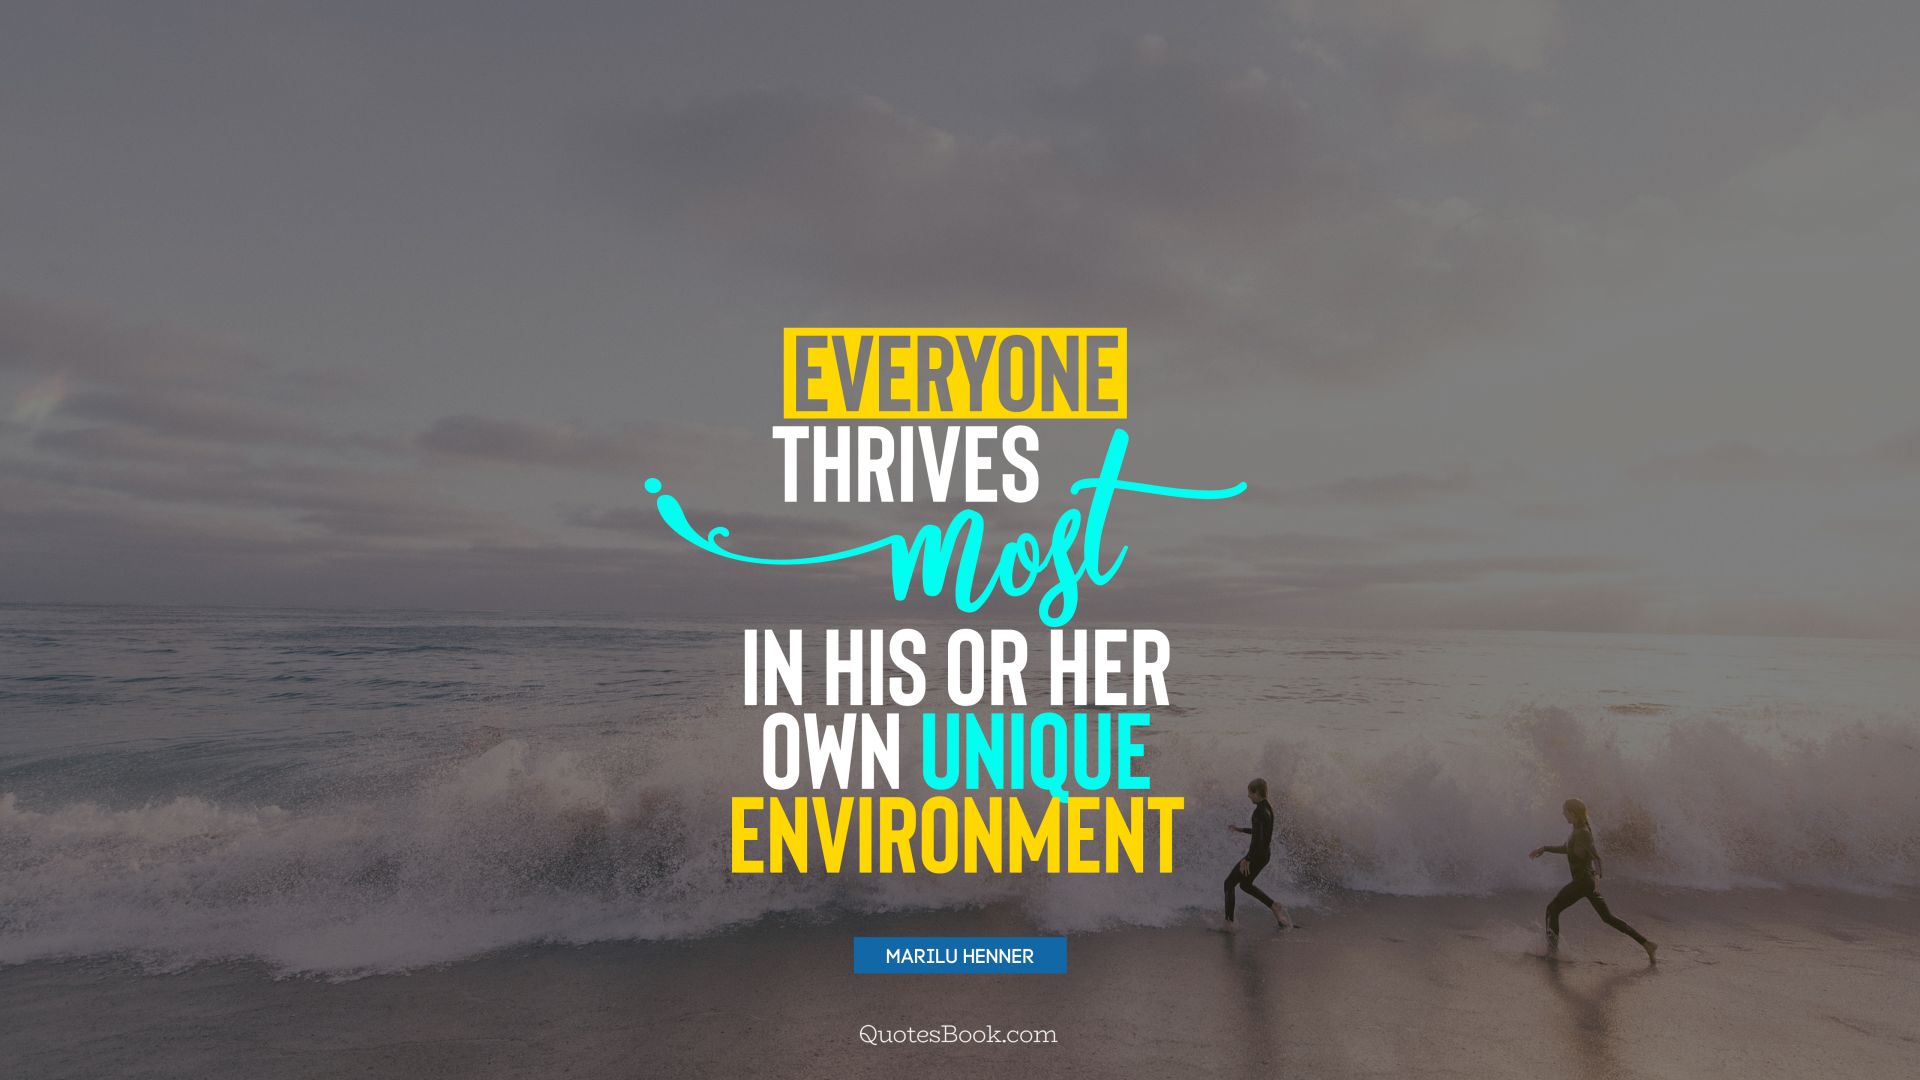 Everyone thrives most in his or her own unique environment. - Quote by Marilu Henner